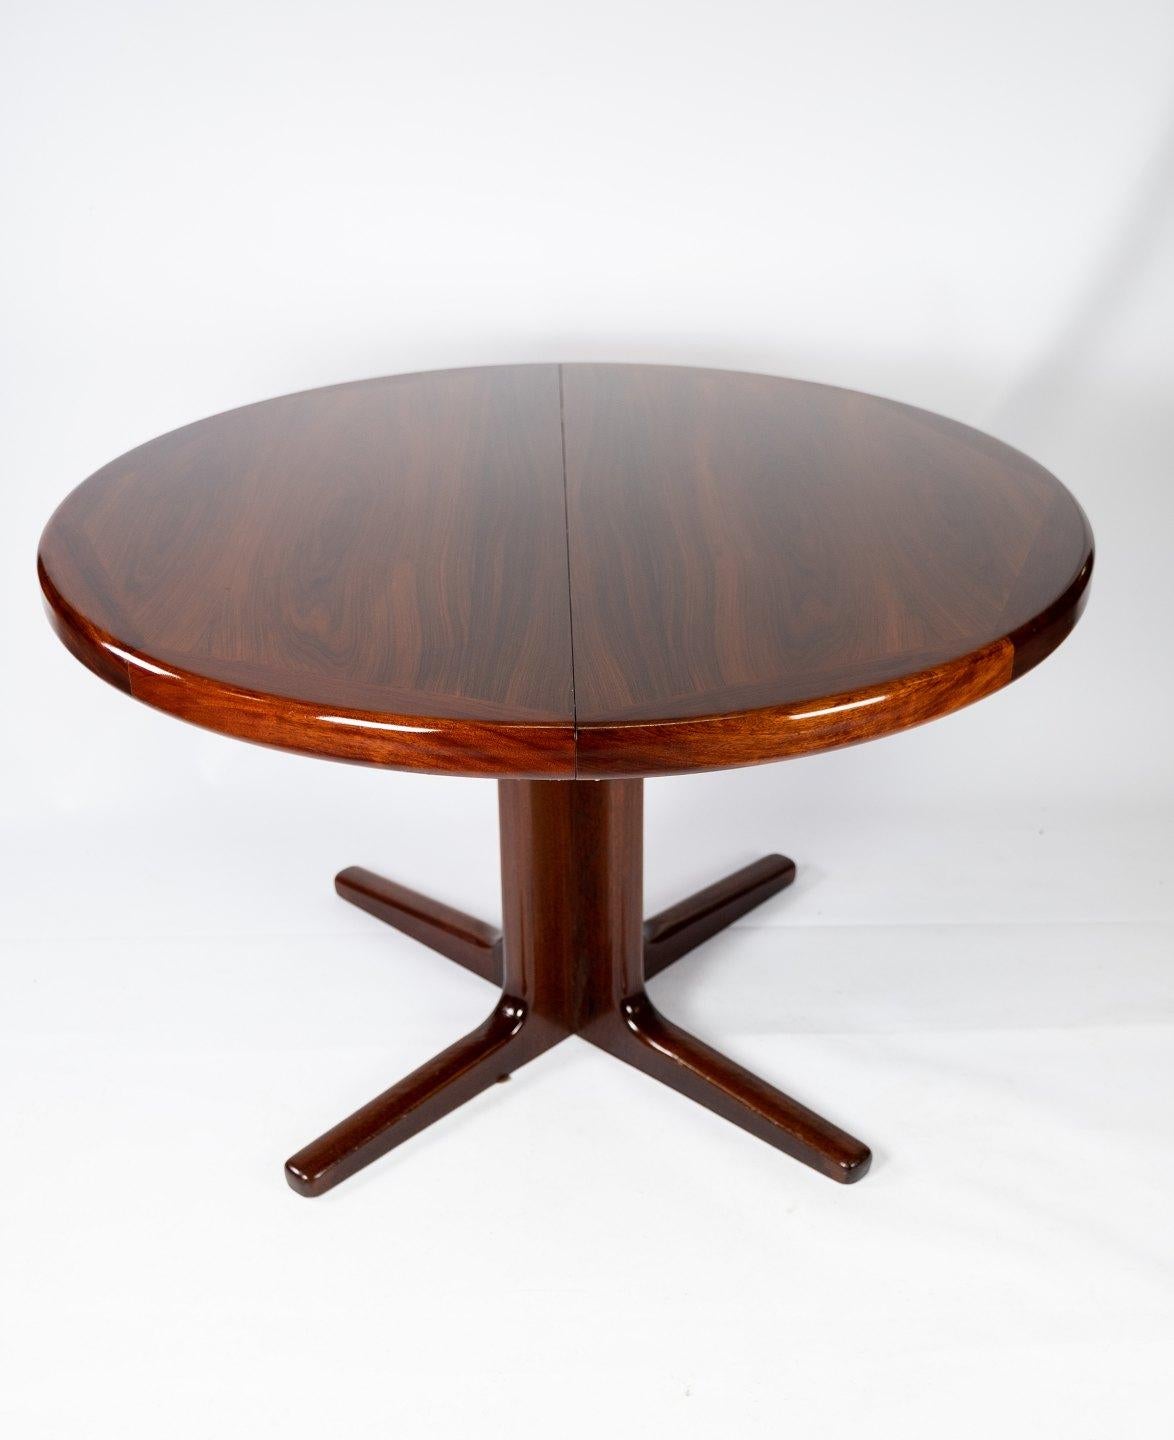 Dining table in rosewood of Danish design manufactured by Vejle furniture factory in the 1960s. The table is in great vintage condition and with two belonging extension plates.